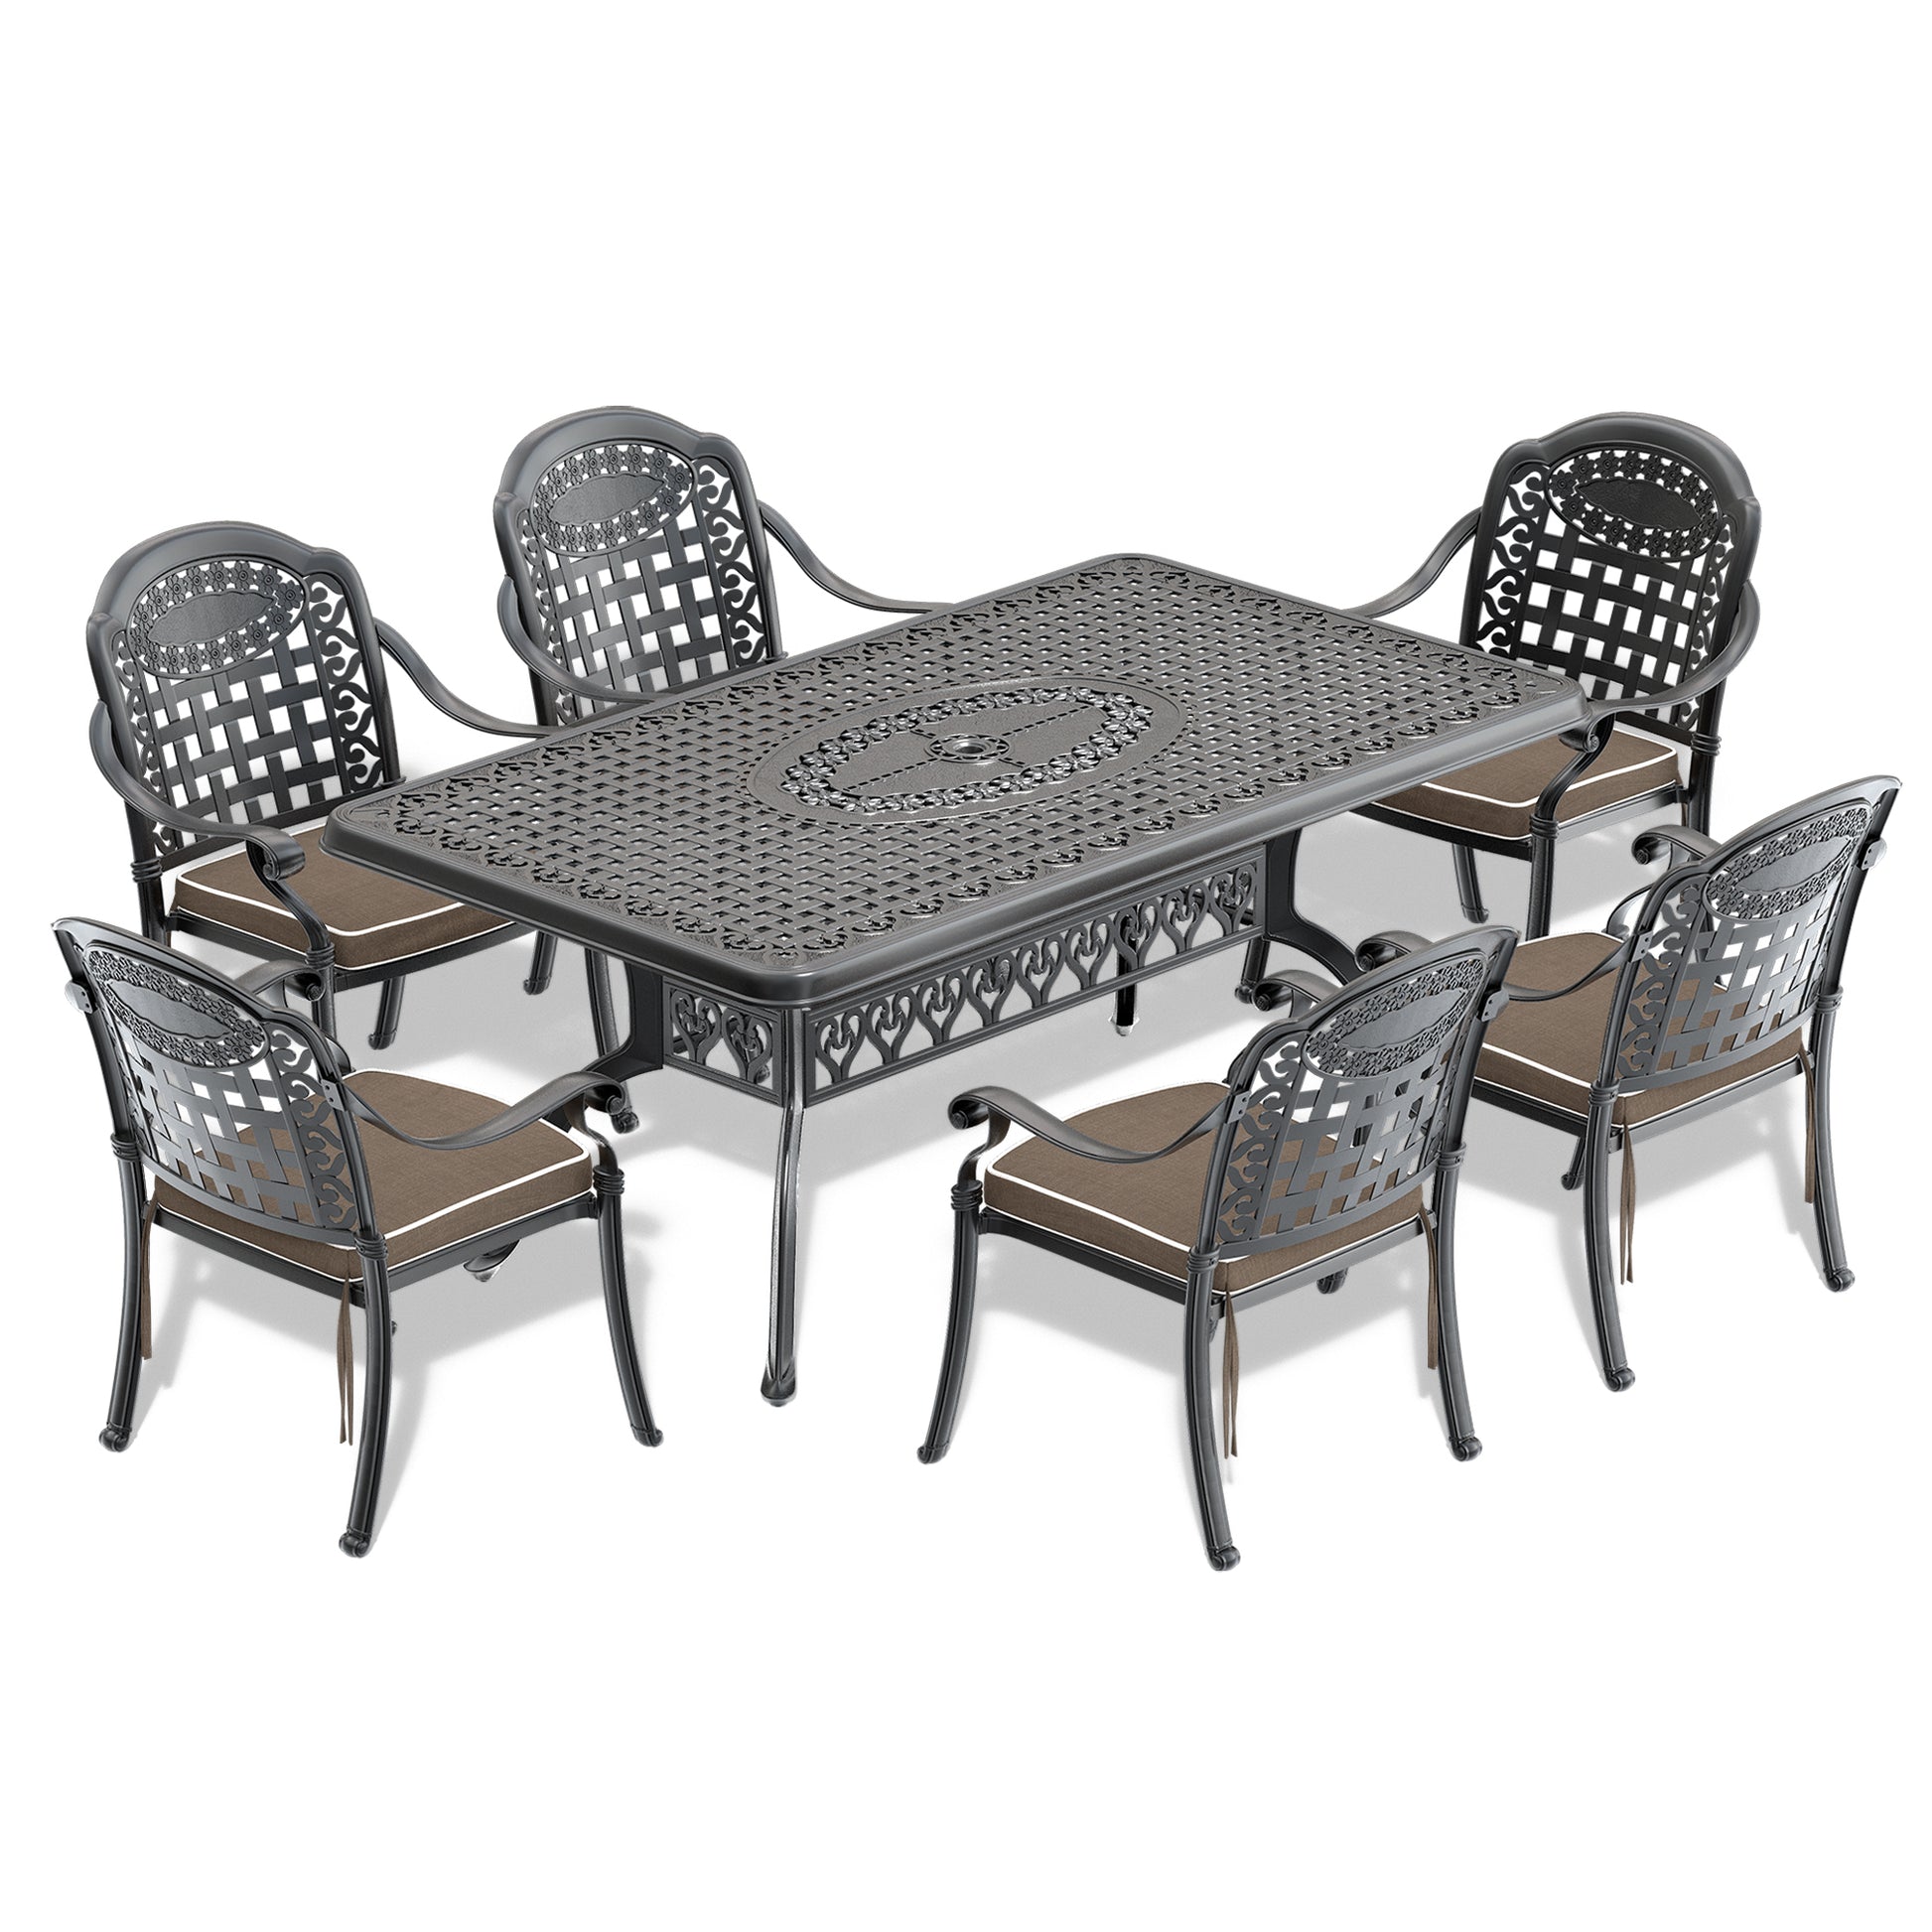 L68.9*w37.4 inch Cast Aluminum Patio Dining Table